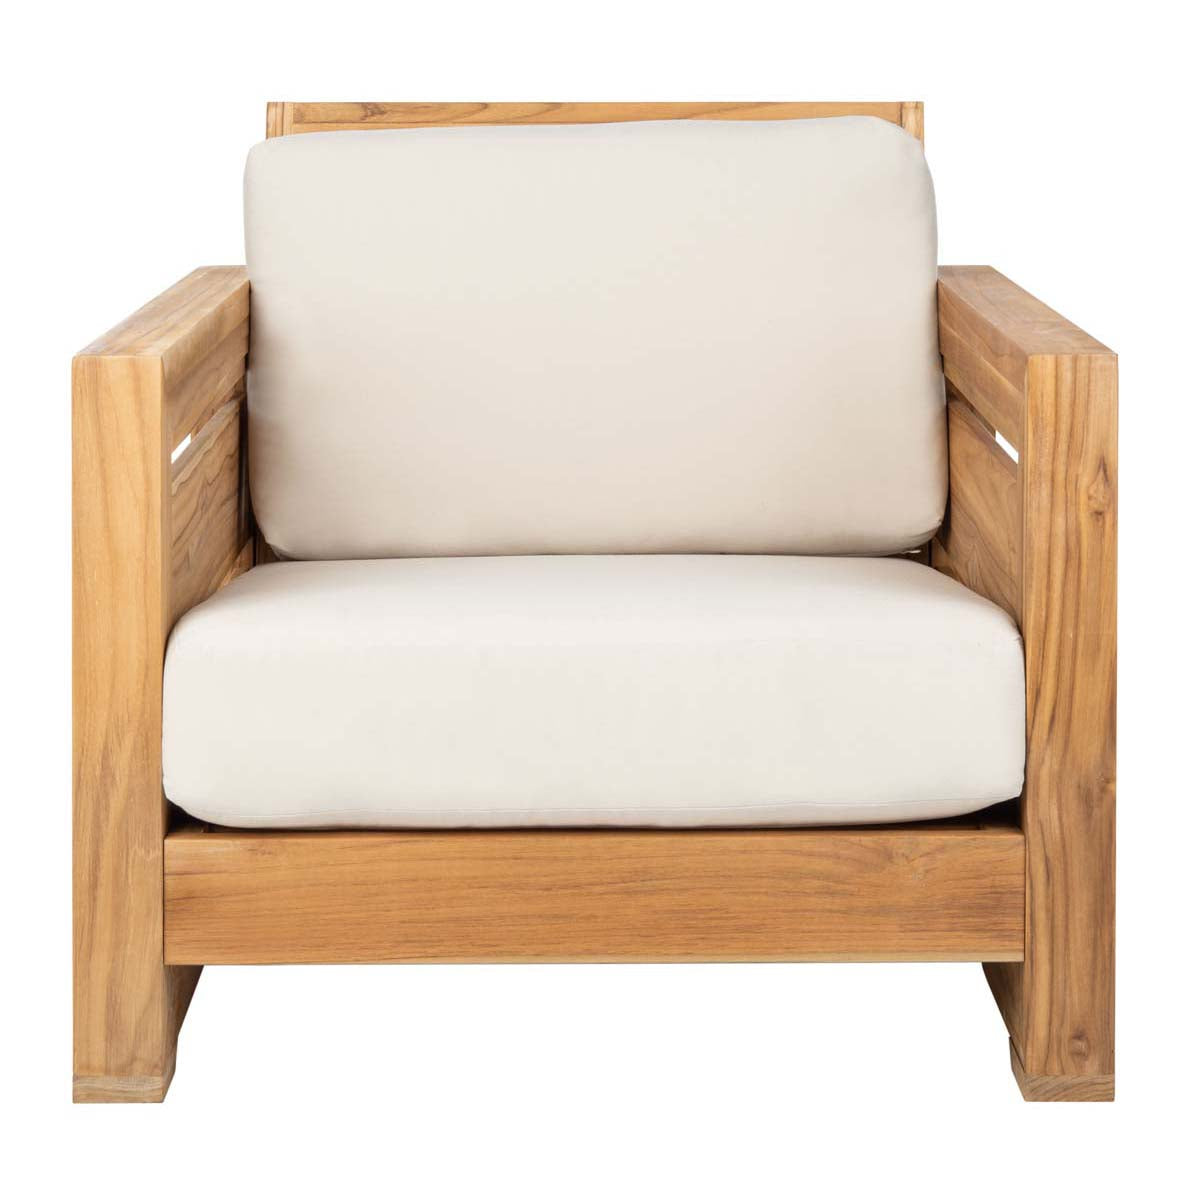 Safavieh Couture Guadeloupe Outdoor Teak Club Chair